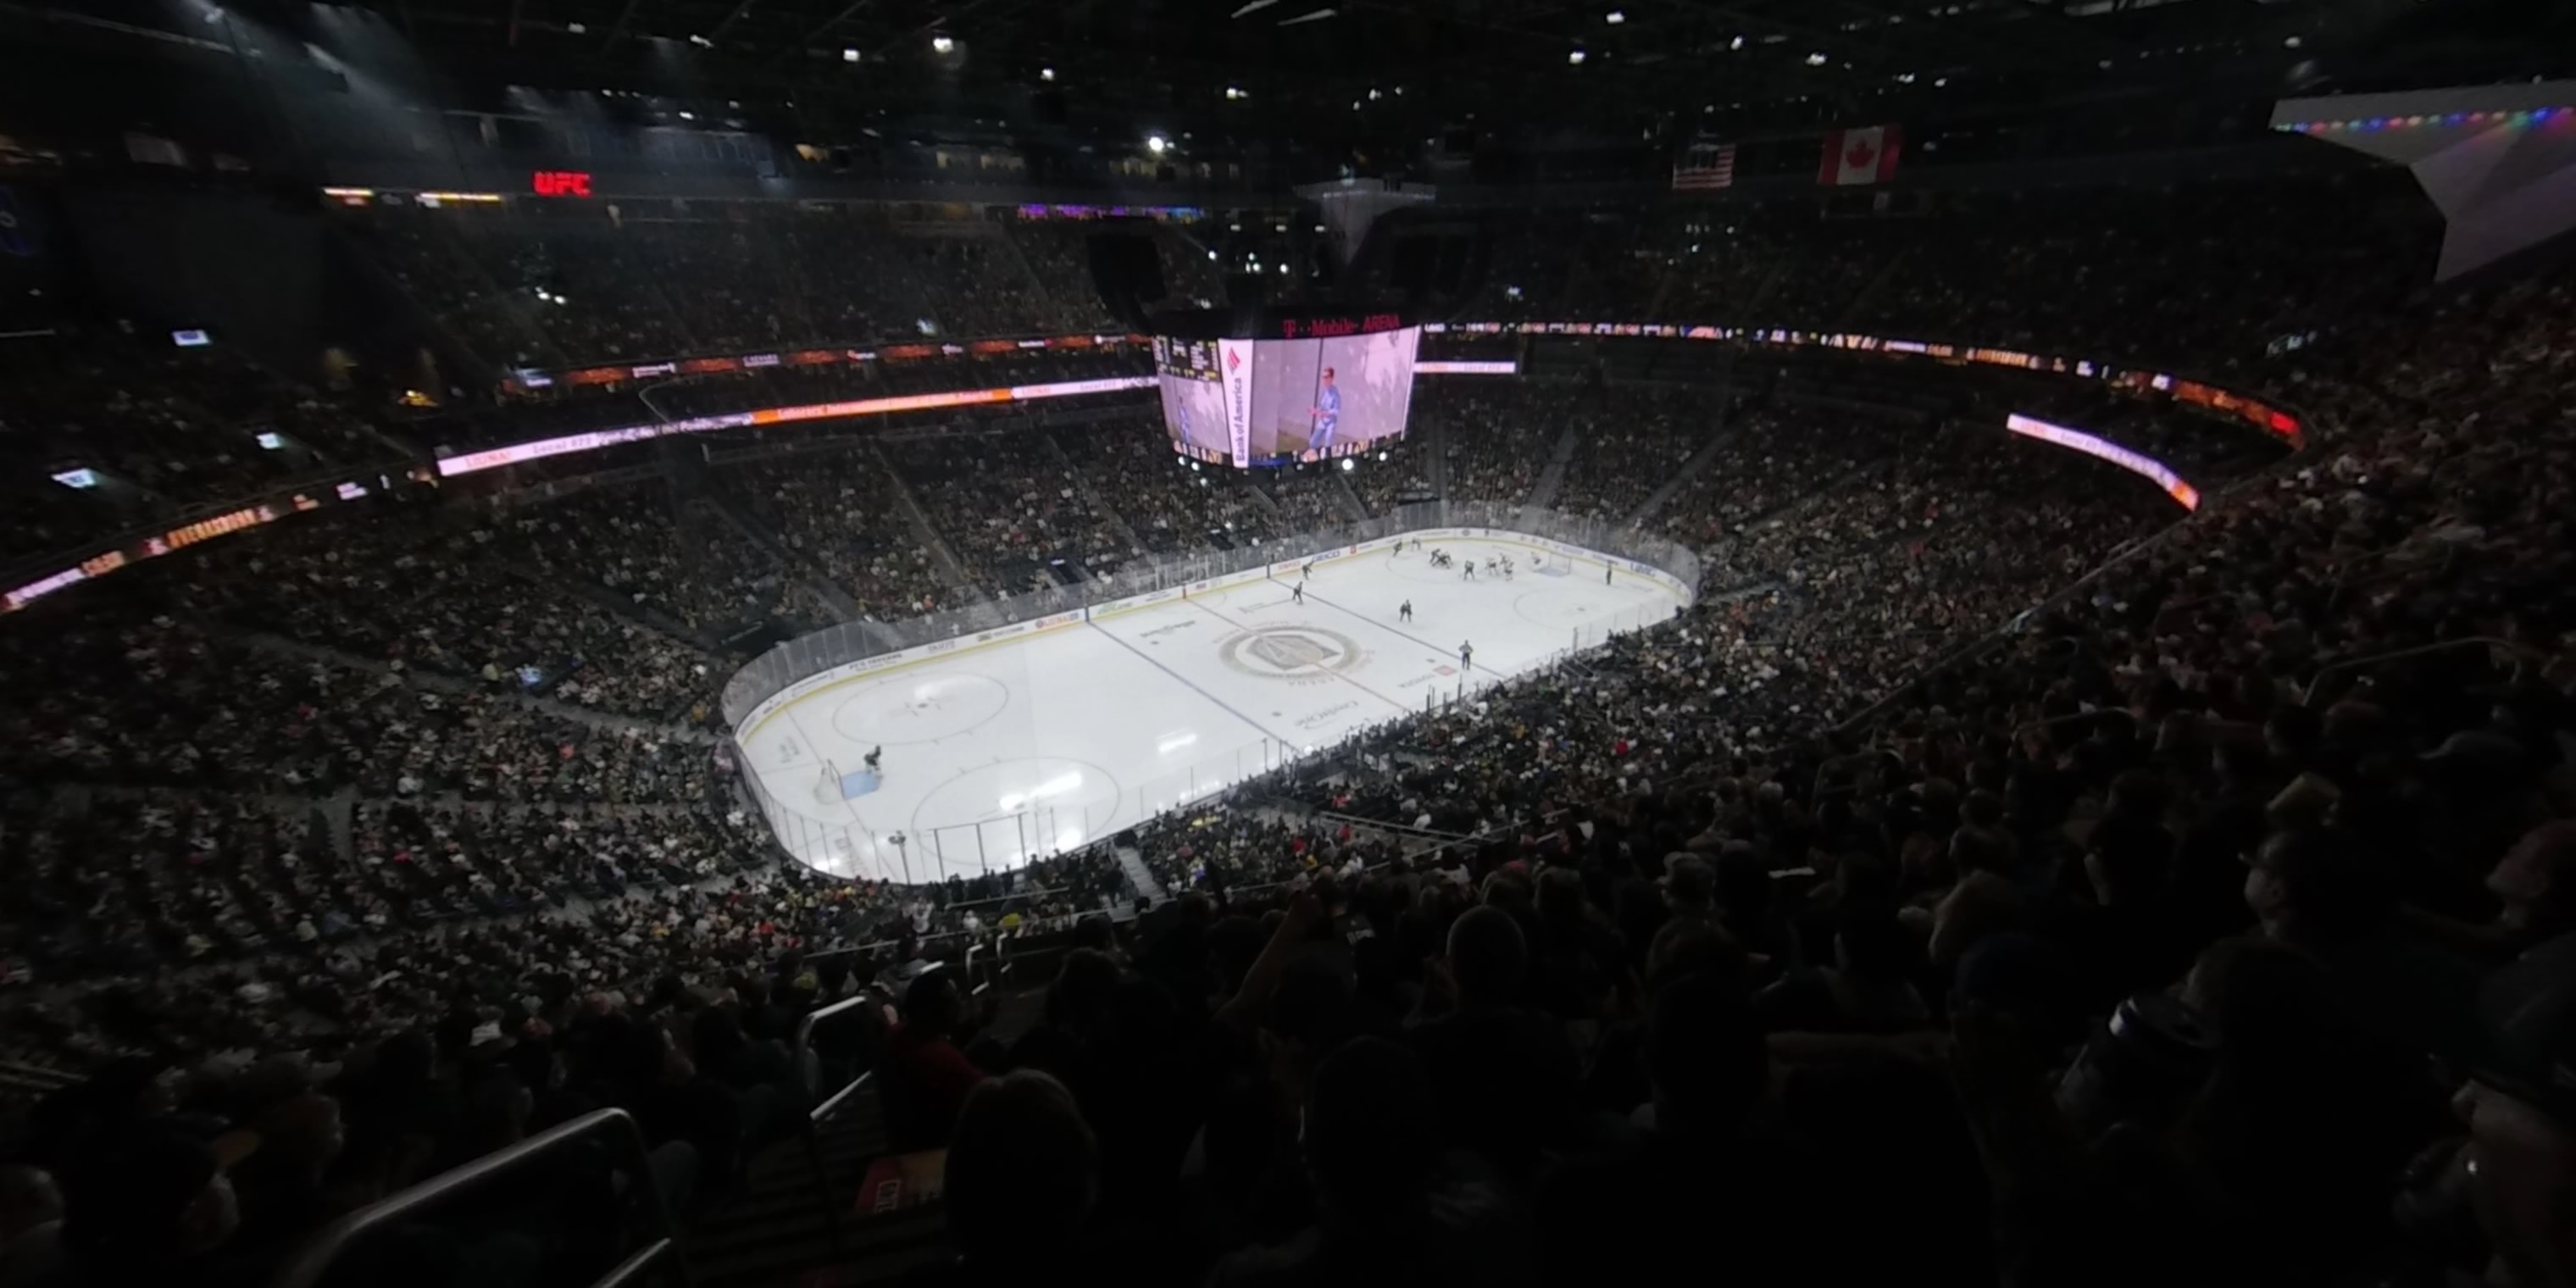 section 201 panoramic seat view  for hockey - t-mobile arena